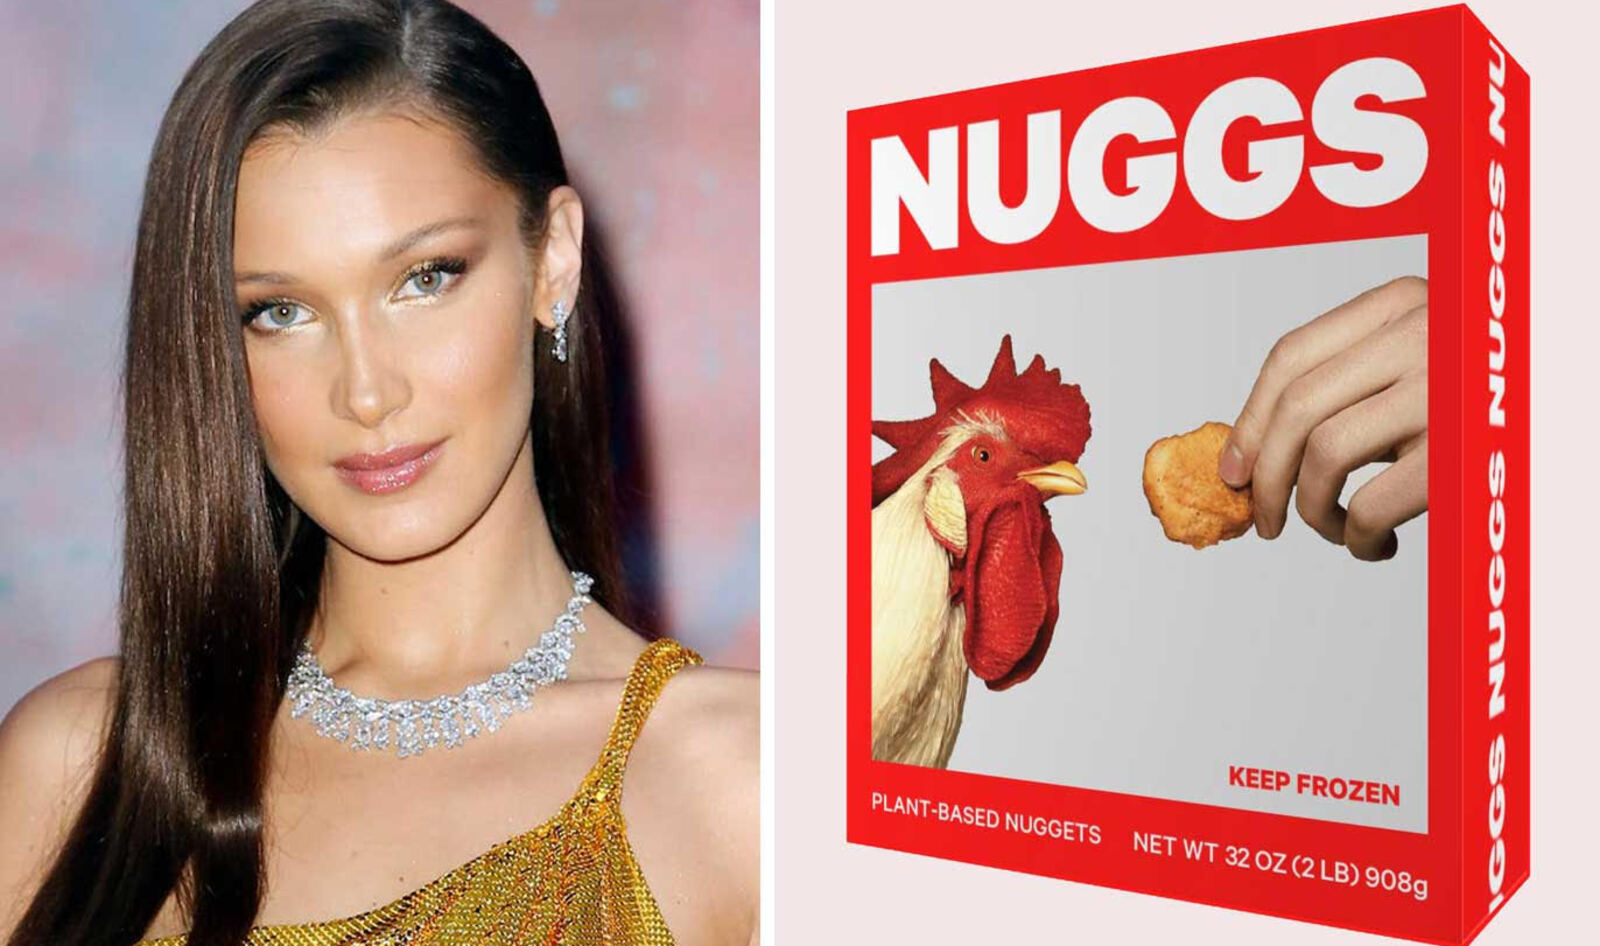 Bella Hadid is “Freaking the F Out” About Spicy Vegan Chicken Nuggets